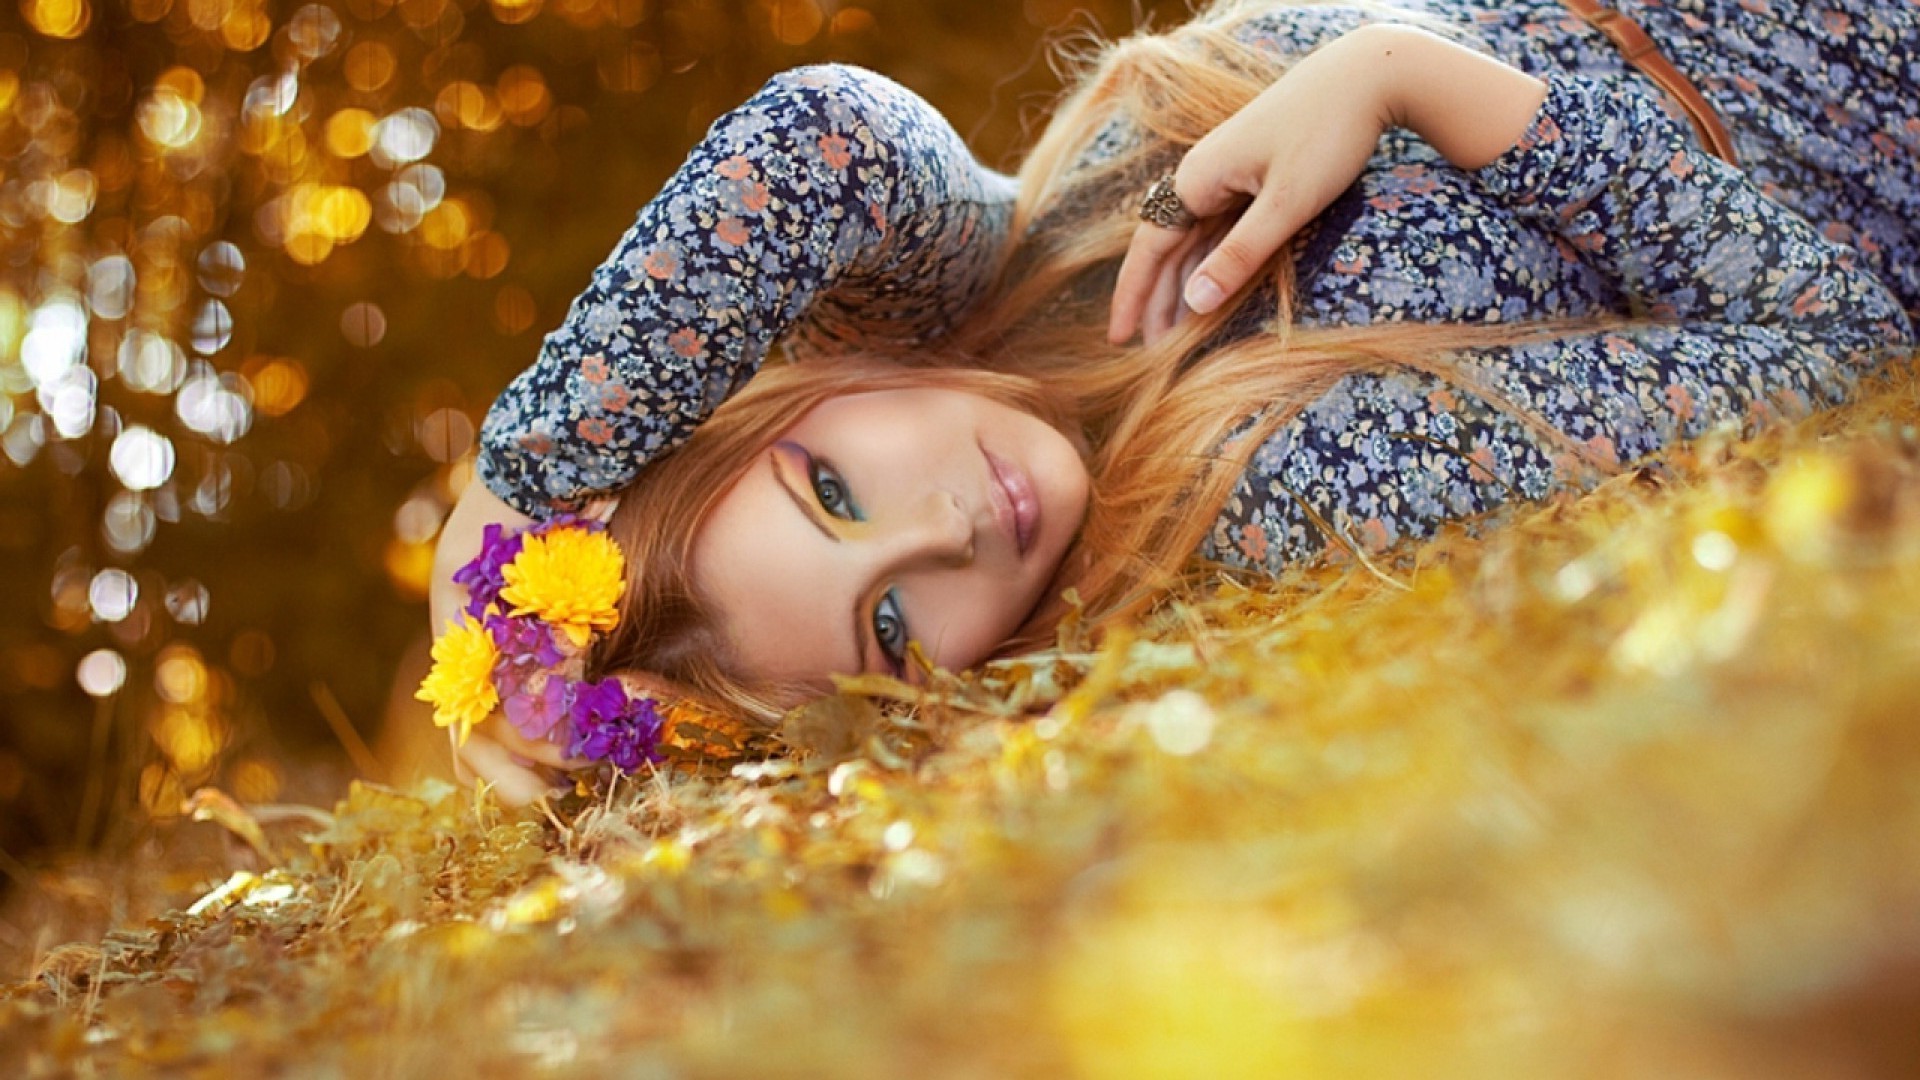 face and smile girl beautiful nature portrait fashion woman fun fall summer model smile pretty cute christmas outdoors gold joy relaxation